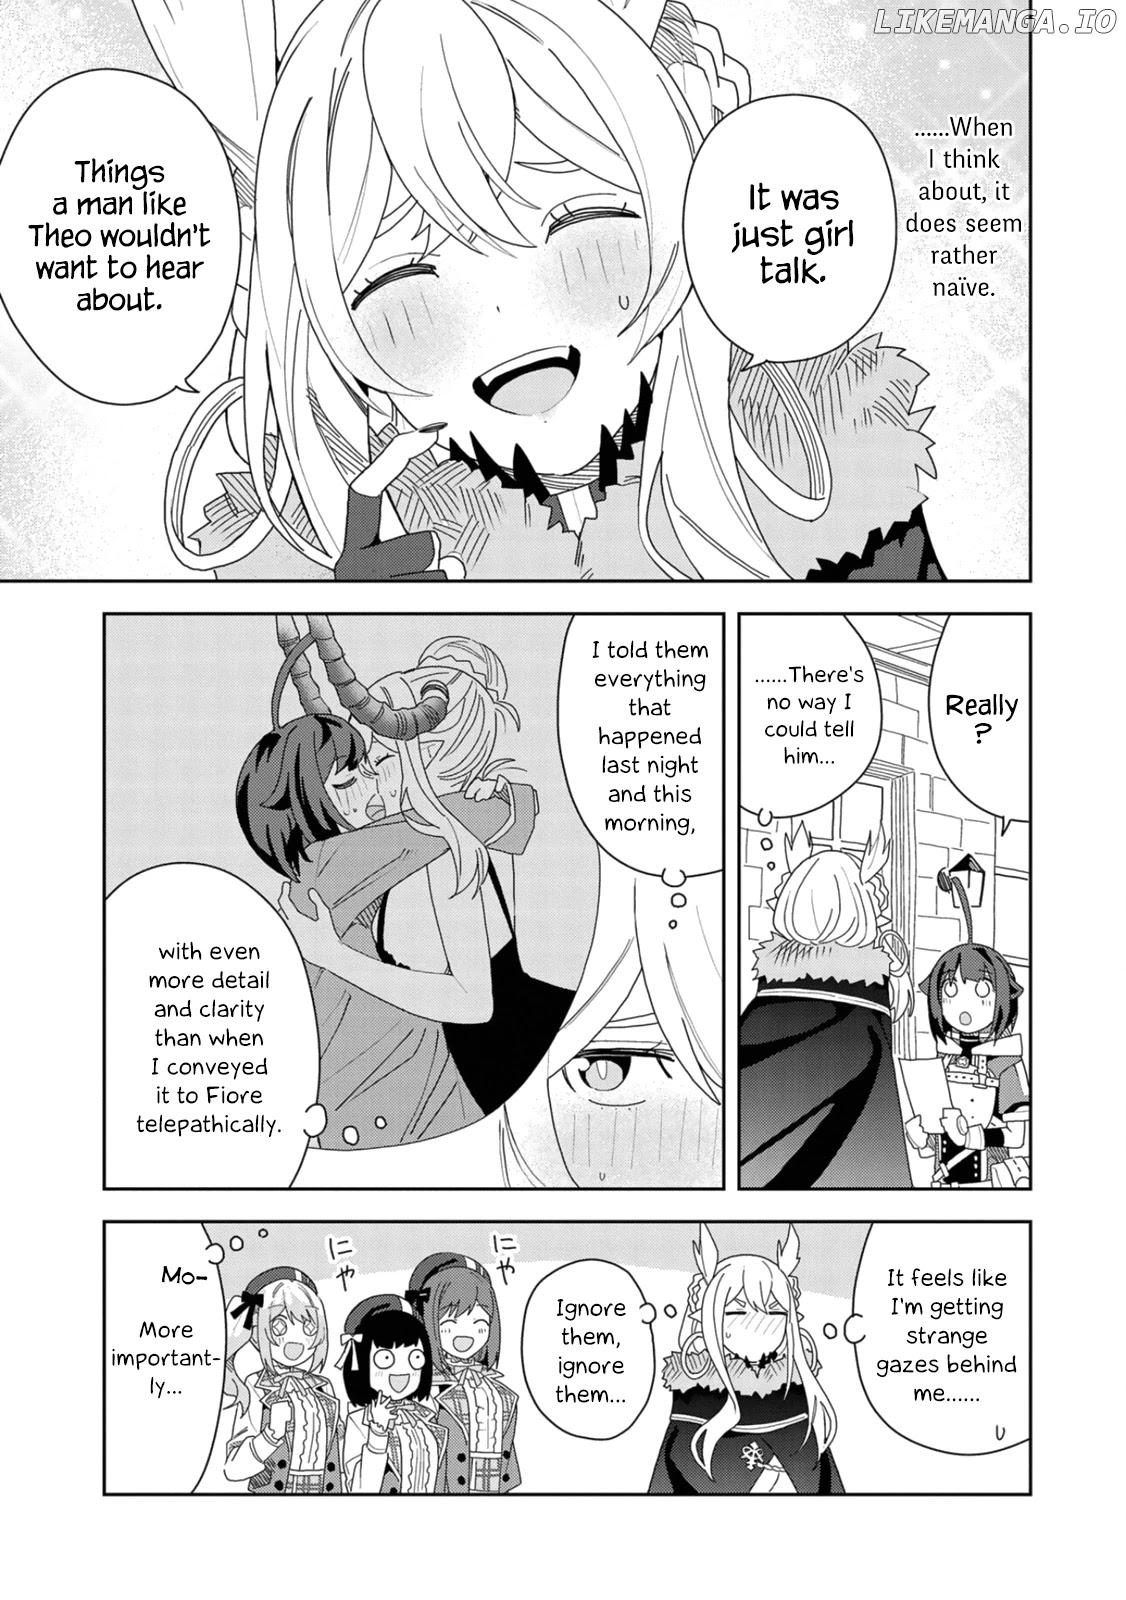 I Summoned The Devil To Grant Me a Wish, But I Married Her Instead Since She Was Adorable ~My New Devil Wife~ chapter 12 - page 3